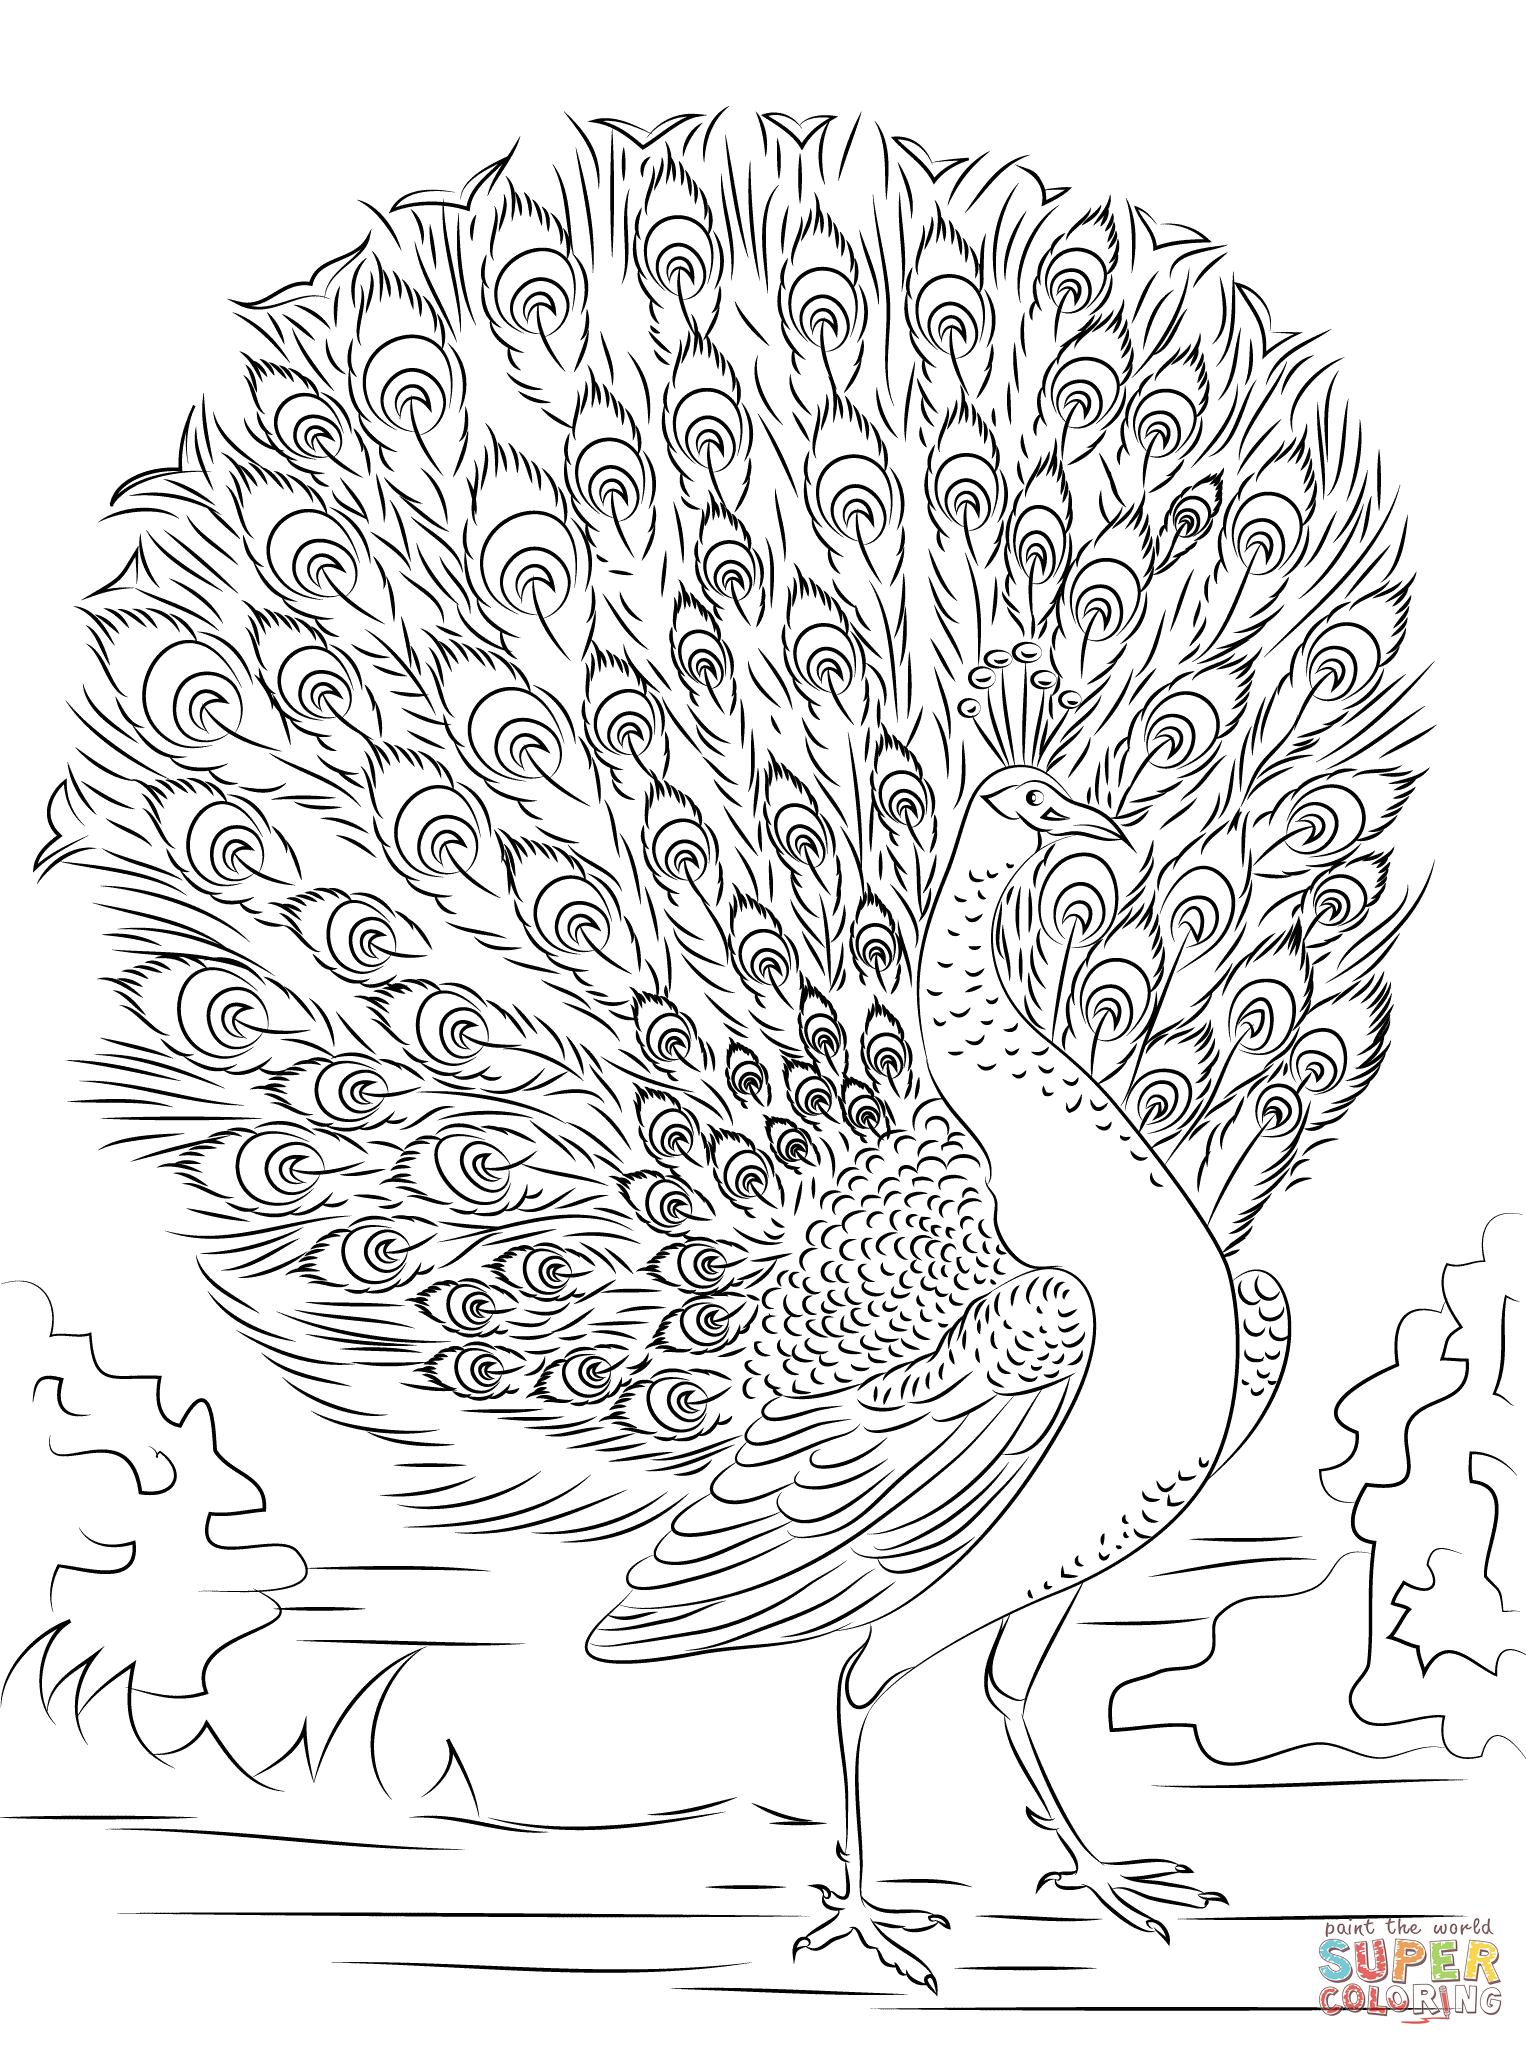 Advanced Coloring Pages Printables - Coloring Pages For All Ages